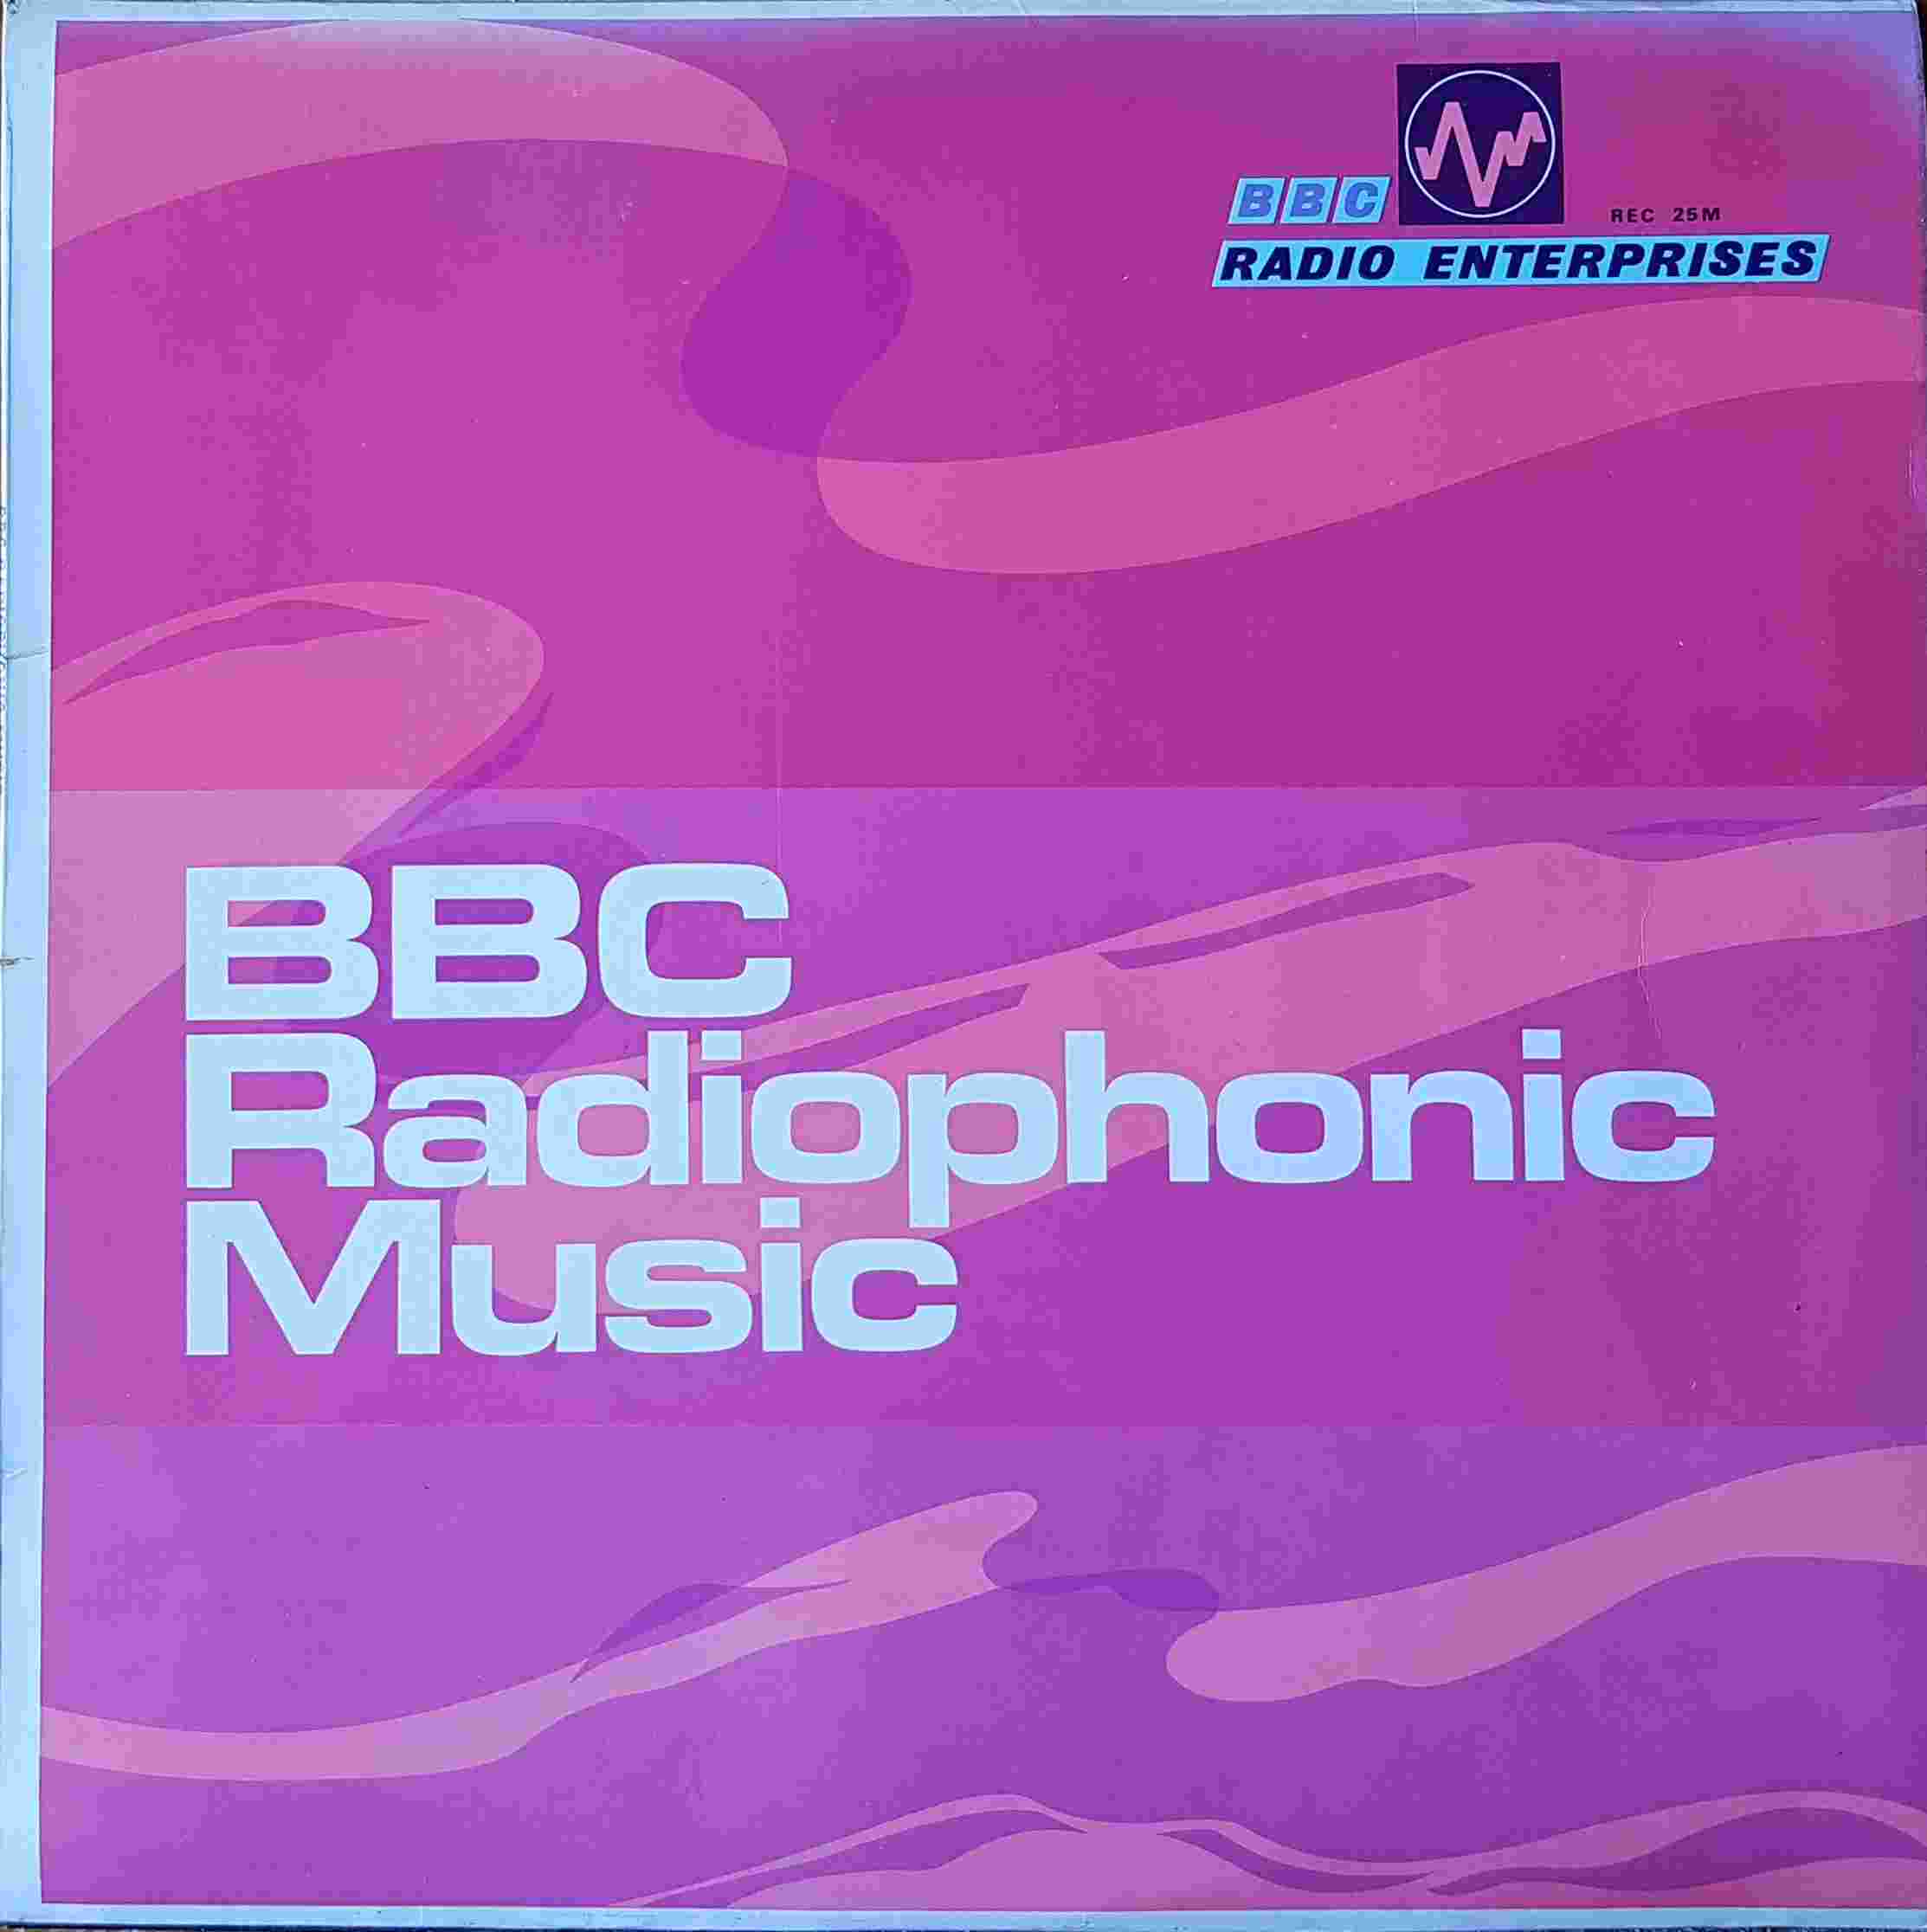 Picture of REC 25 BBC radiophonic music by artist David Cain / John Baker / Delia Derbyshire from the BBC albums - Records and Tapes library